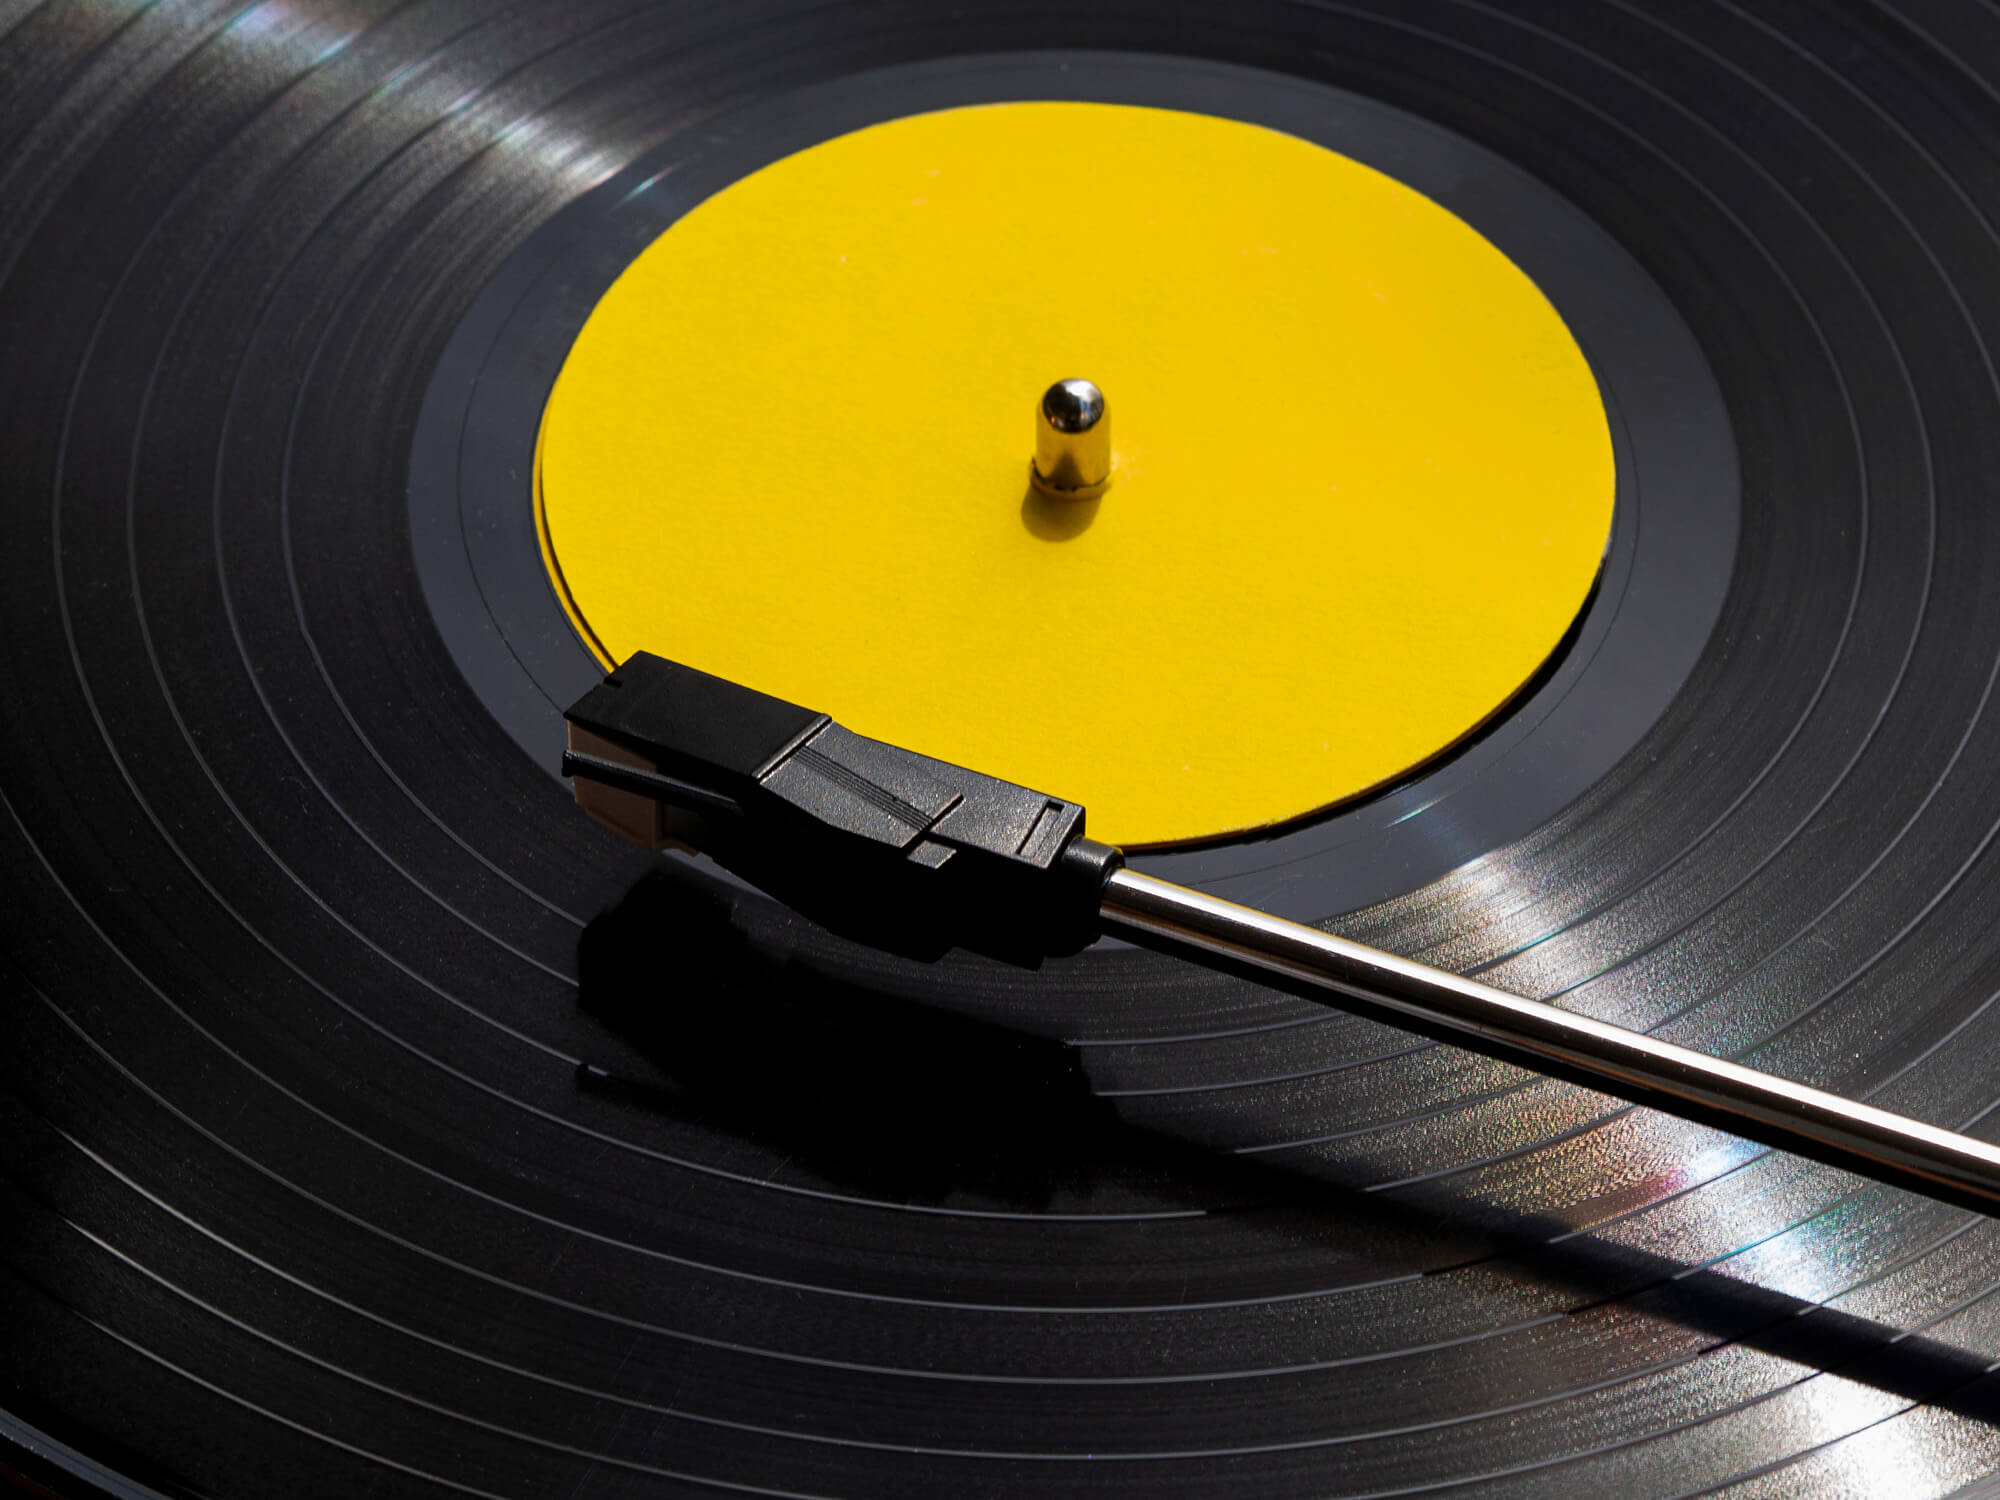 A close up of a vinyl record under a needle. The centre of the record is bright yellow, like the colour of a rubber duck.